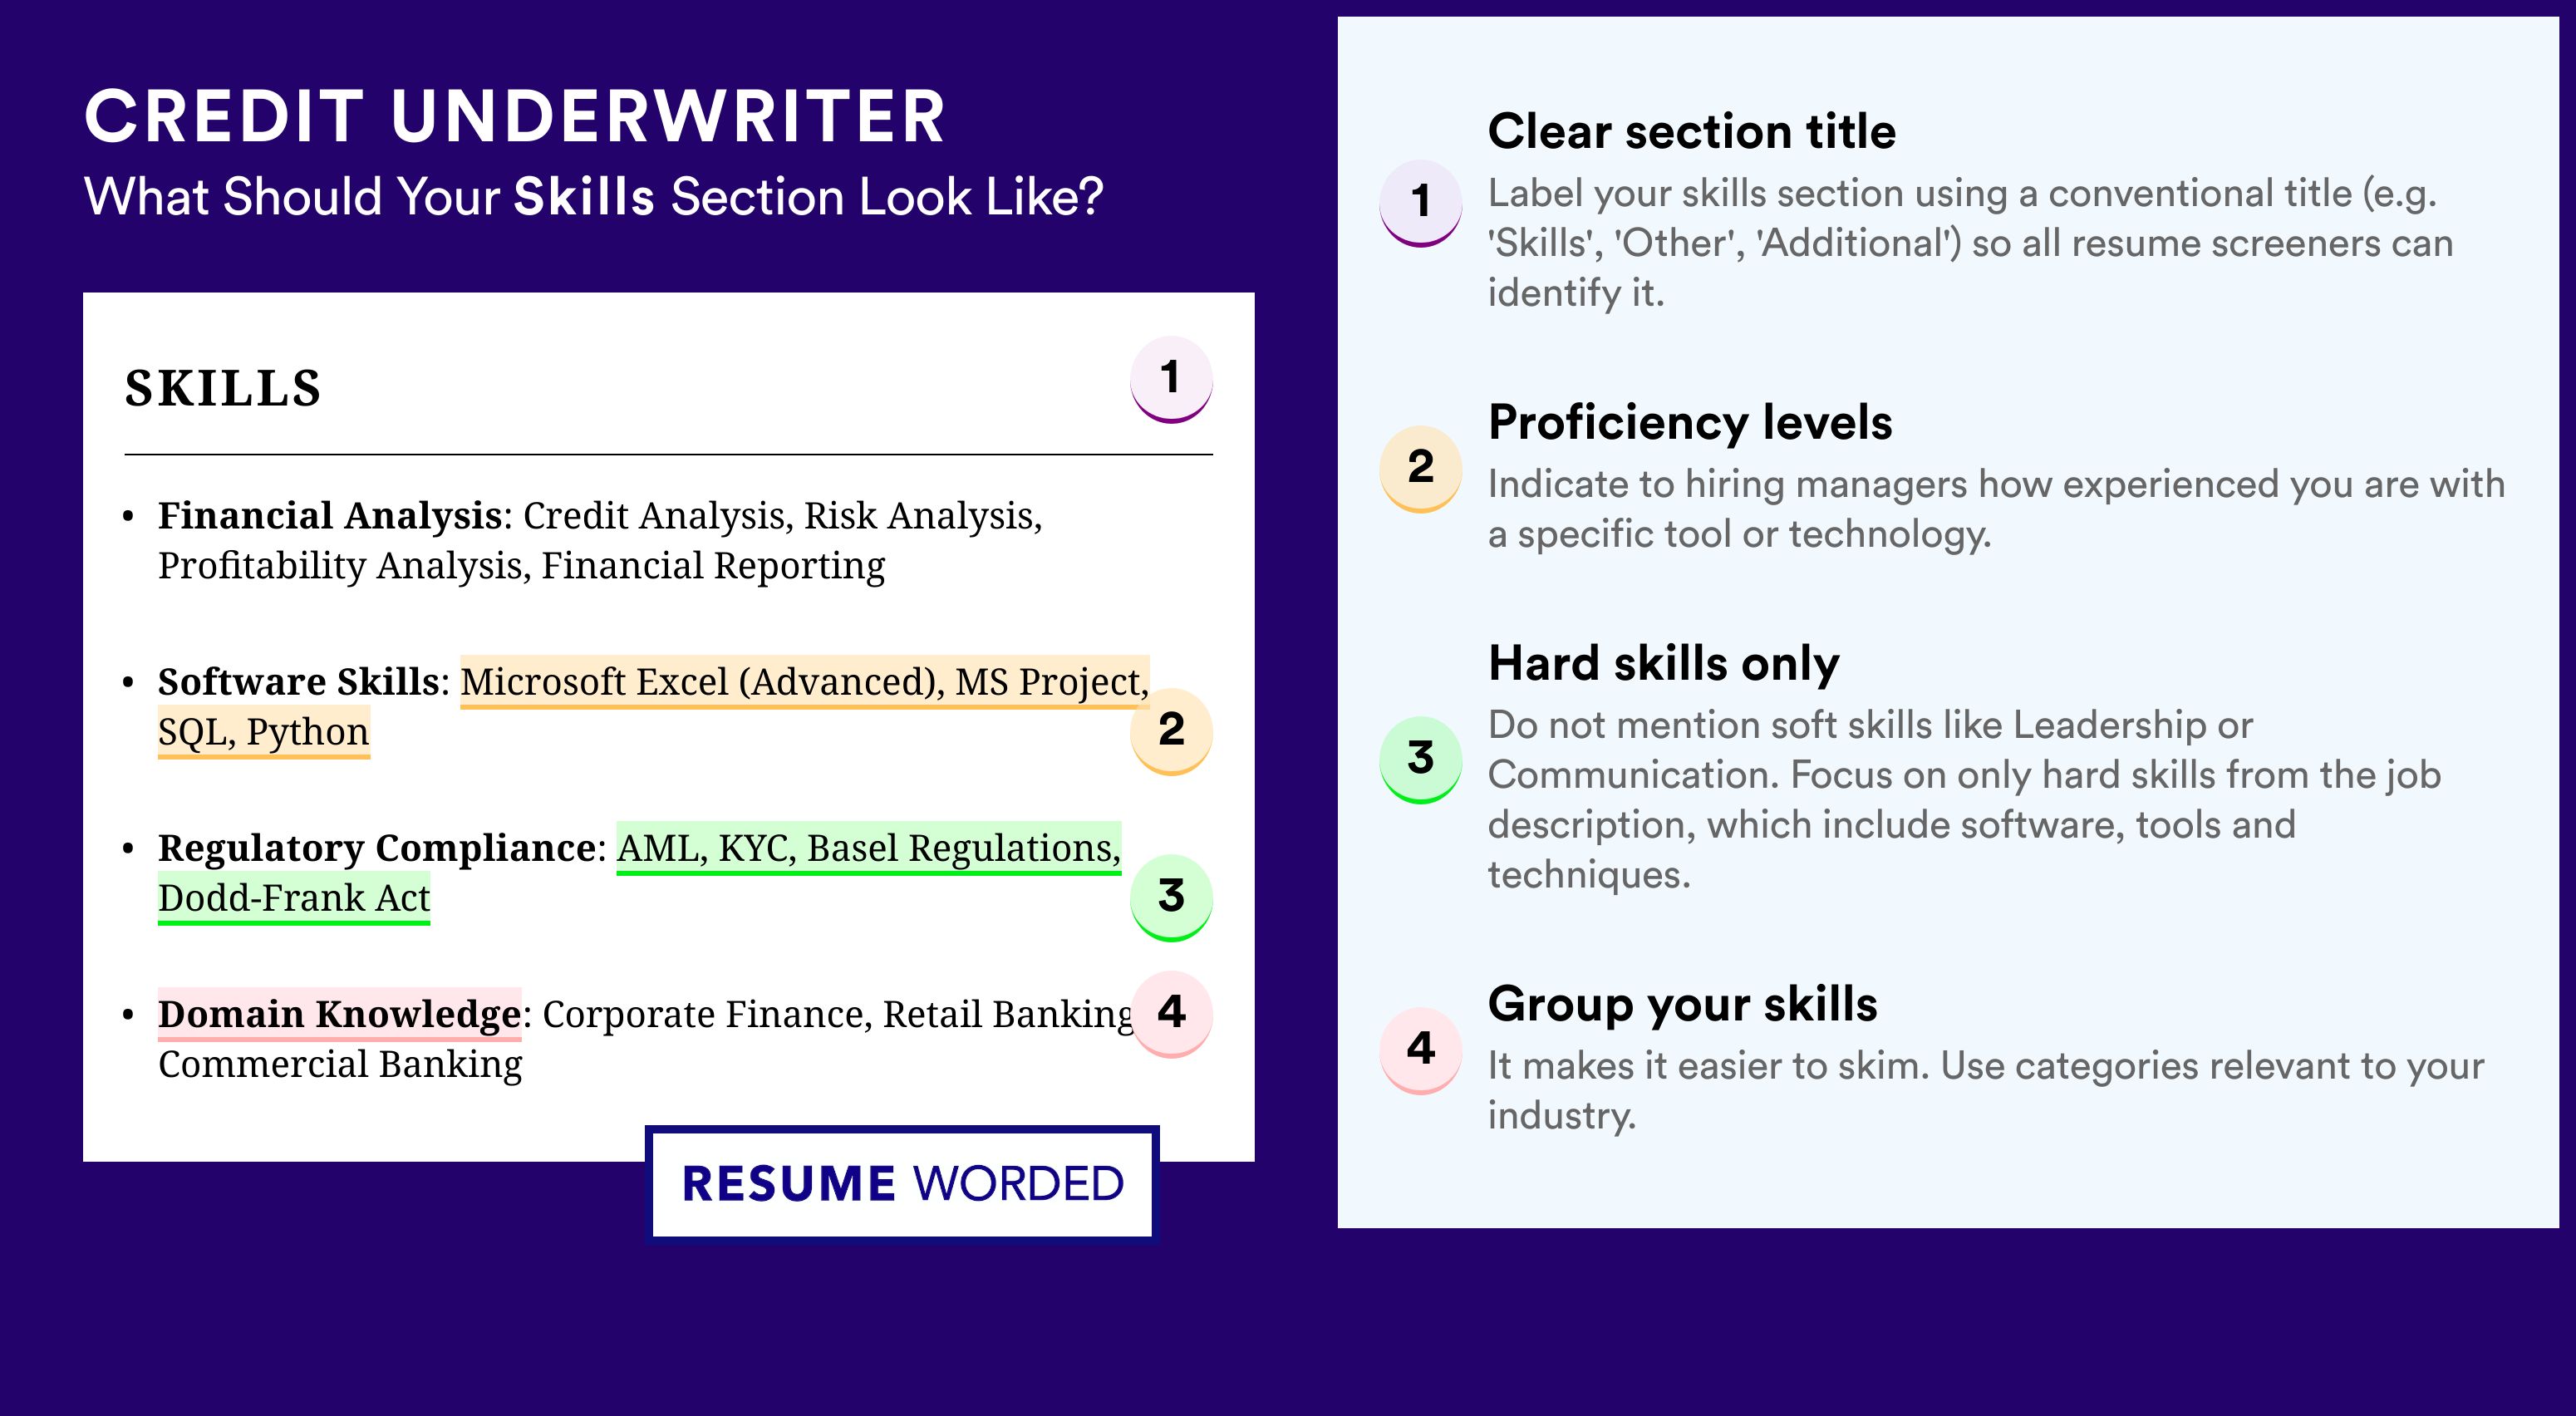 How To Write Your Skills Section - Credit Underwriter Roles